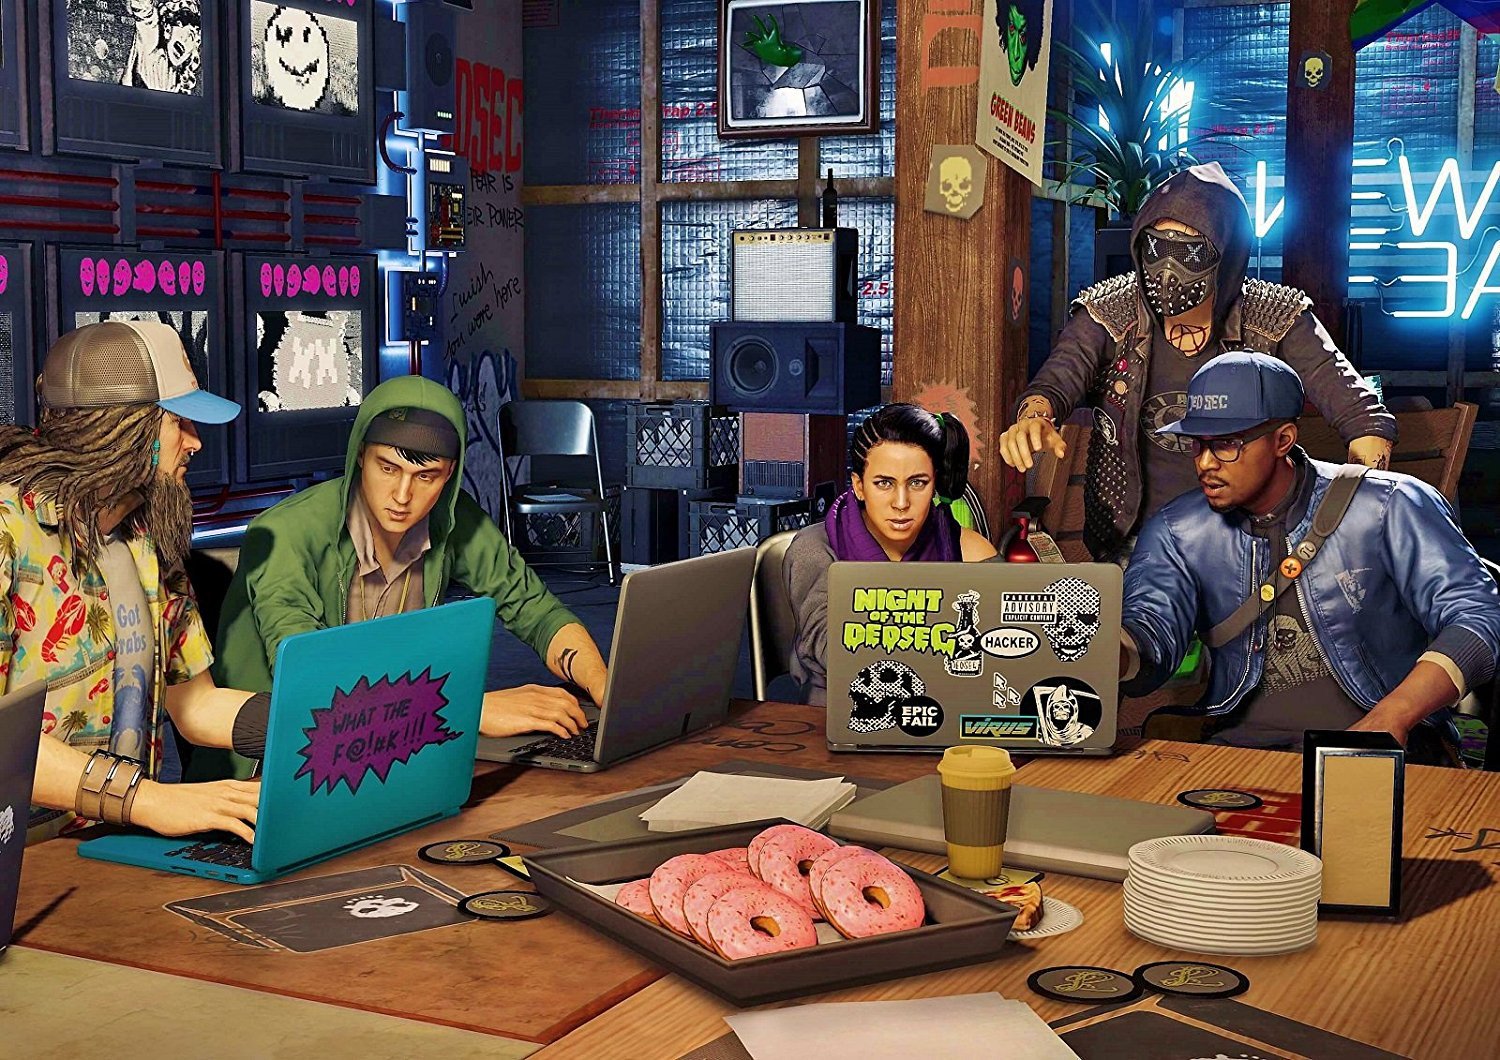 Marcus sitting on the right side of a table looking at a laptop with his DedSec teammates. There are pink frosted donuts on the table.